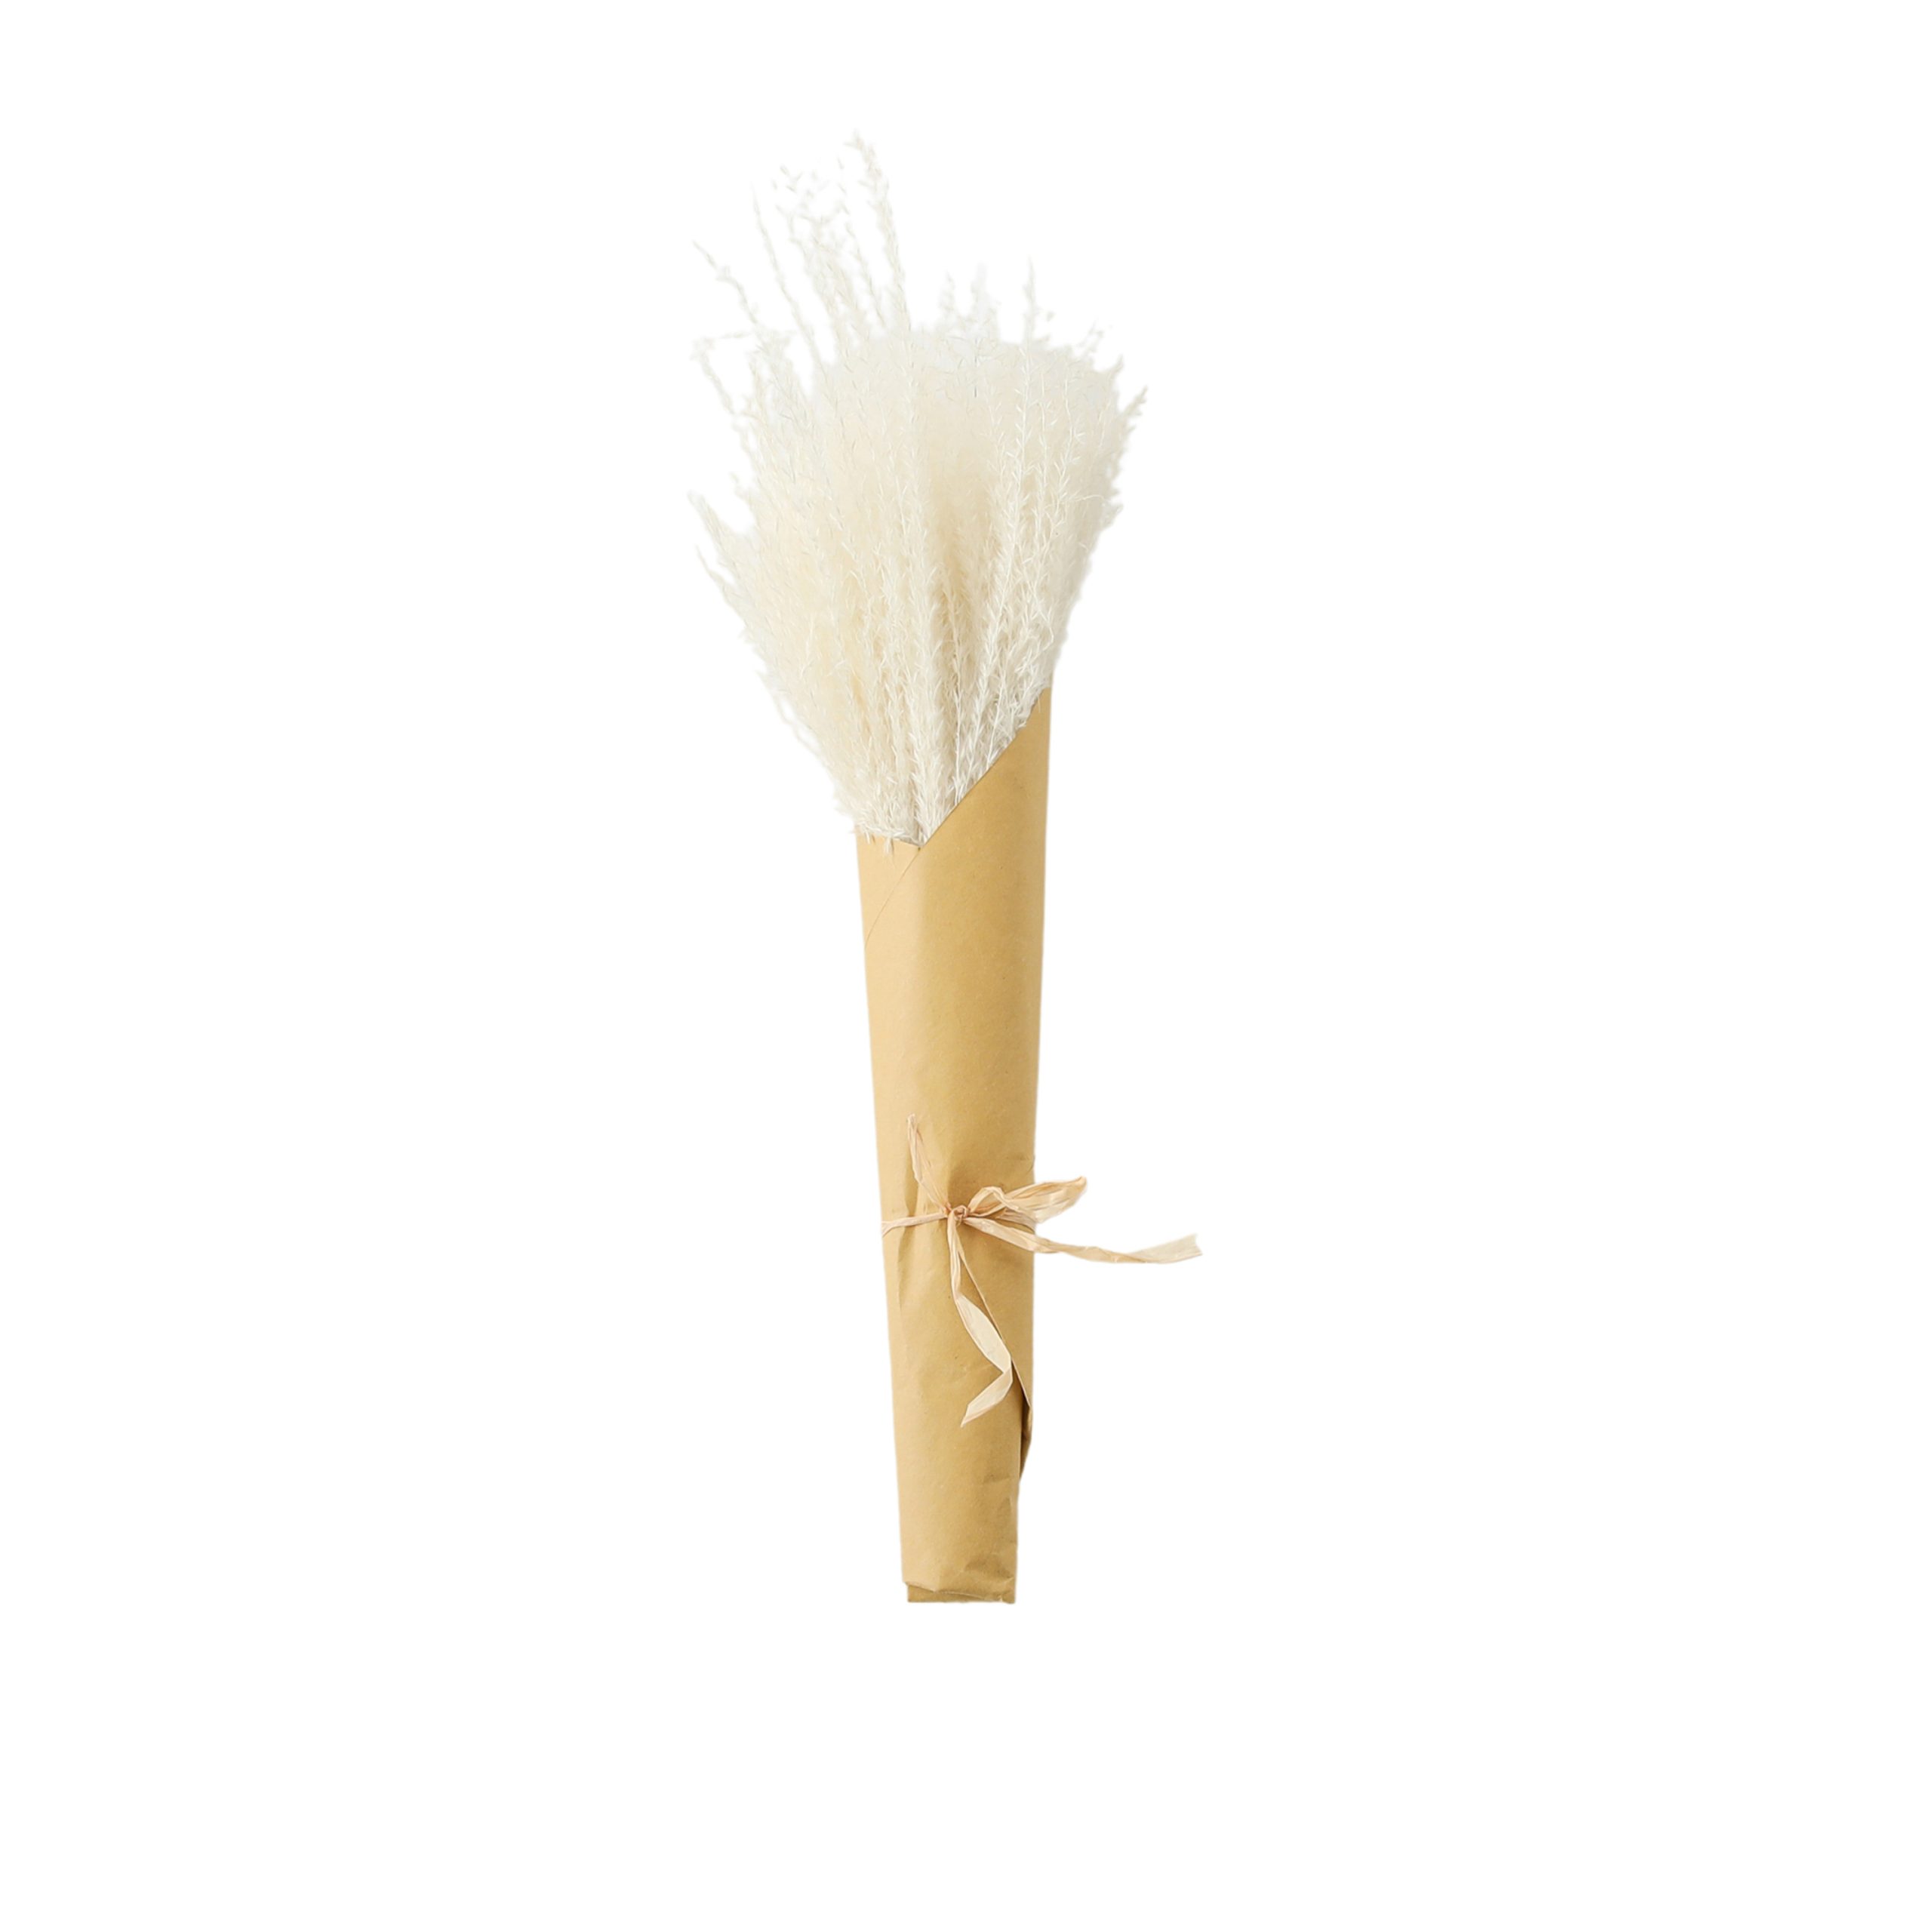 Gallery Direct Dried Reed Grass Bundle Paper Wrap White